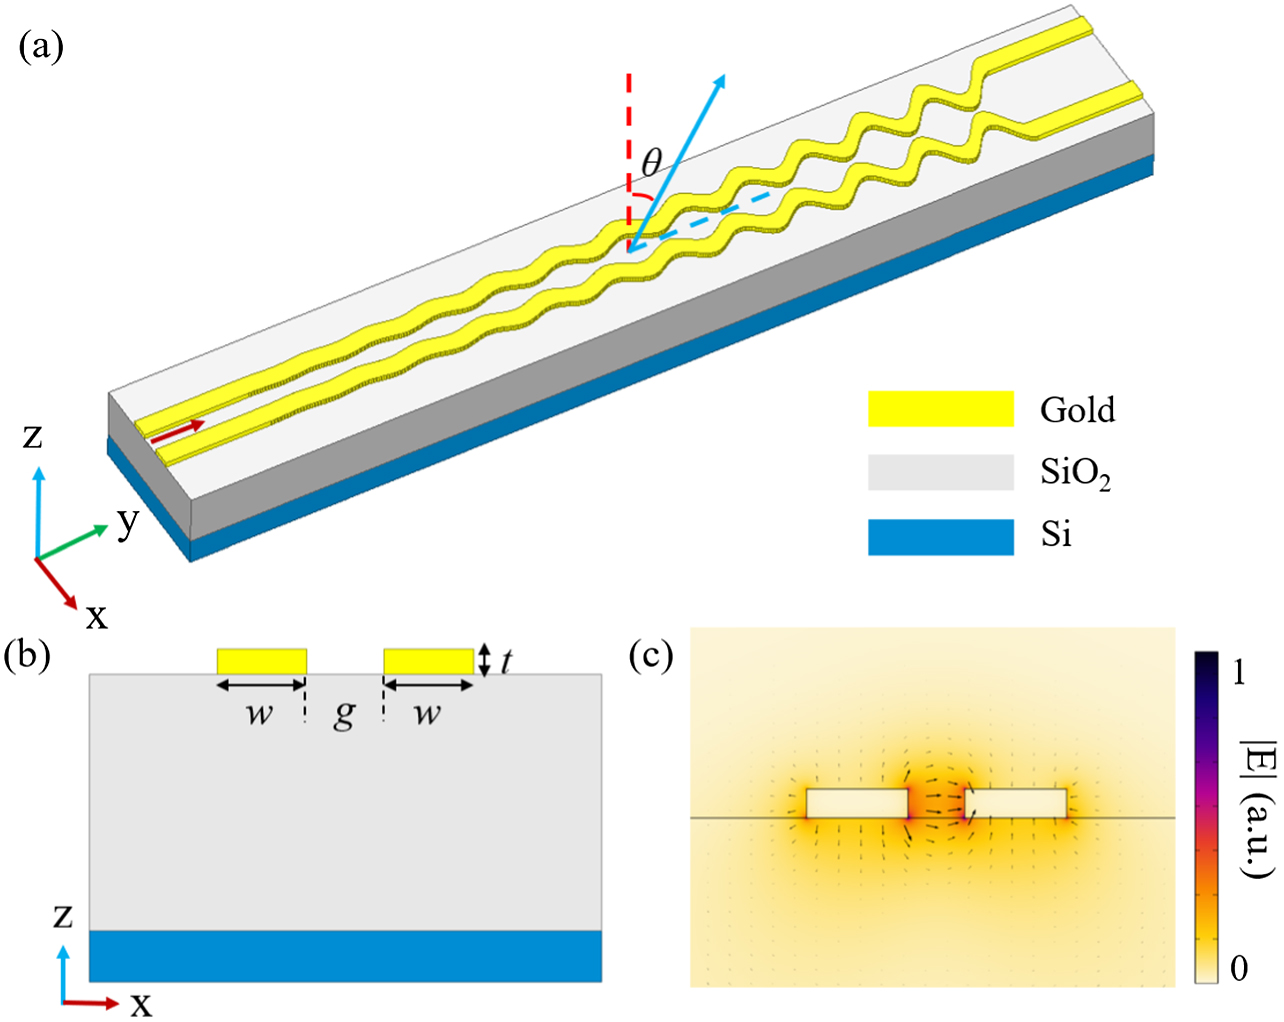 (a) 3D schematic view of the proposed low-sidelobe plasmonic antenna. (b) Cross-section view of a uniform plasmonic gap waveguide. (c) E-field distribution of the plasmonic gap mode. The parameters are w=350 nm, g=200 nm, and t=100 nm.